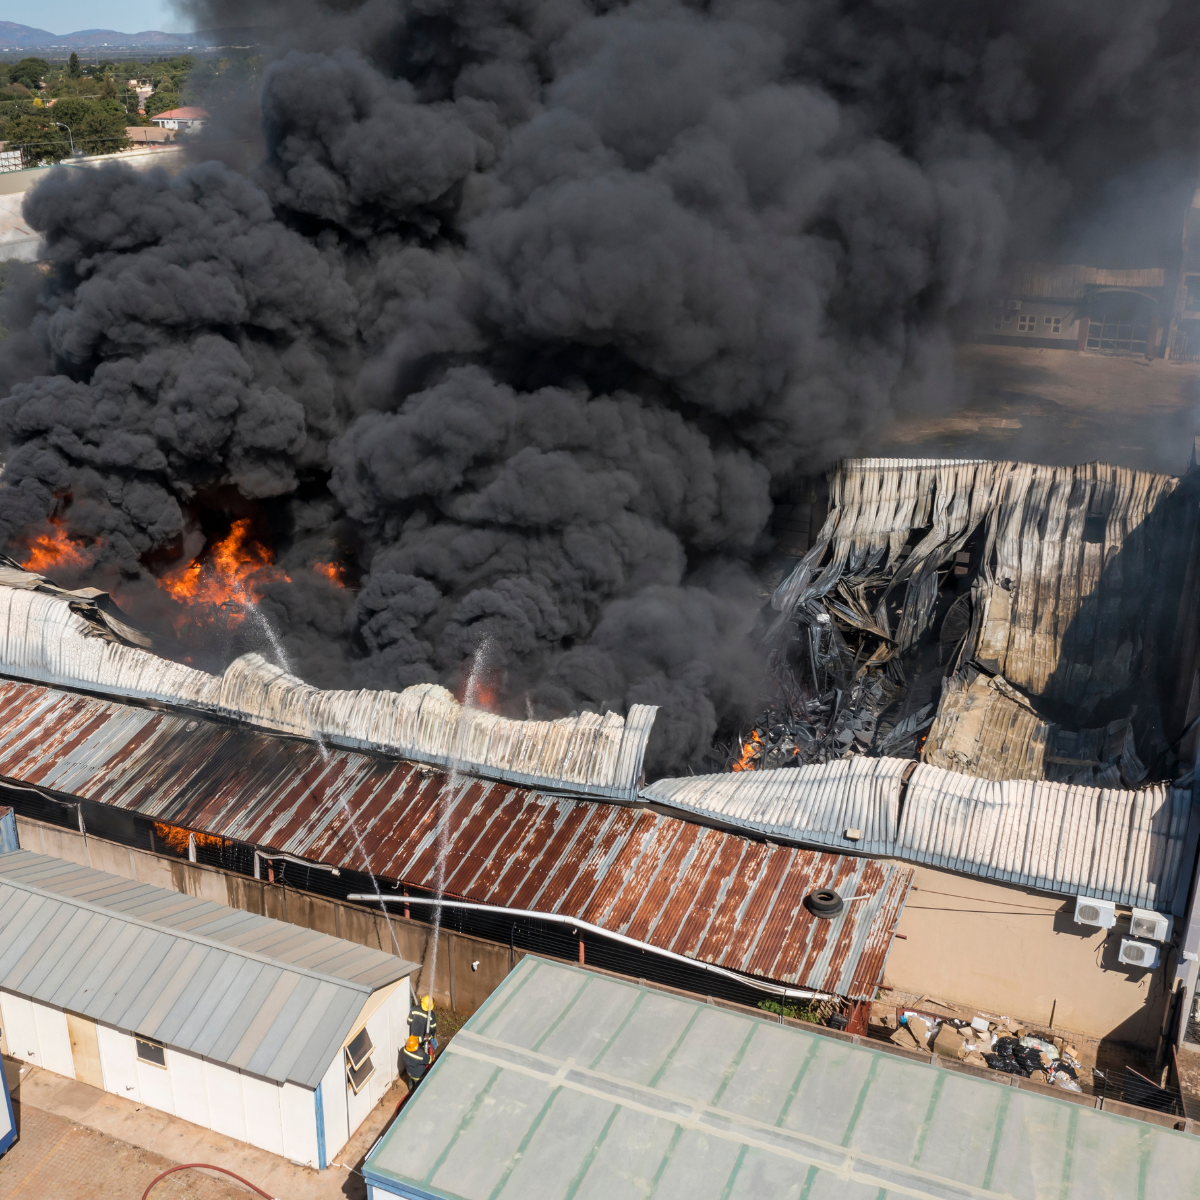 Image of a large warehouse on fire with black clouds of smoke using an aerial view